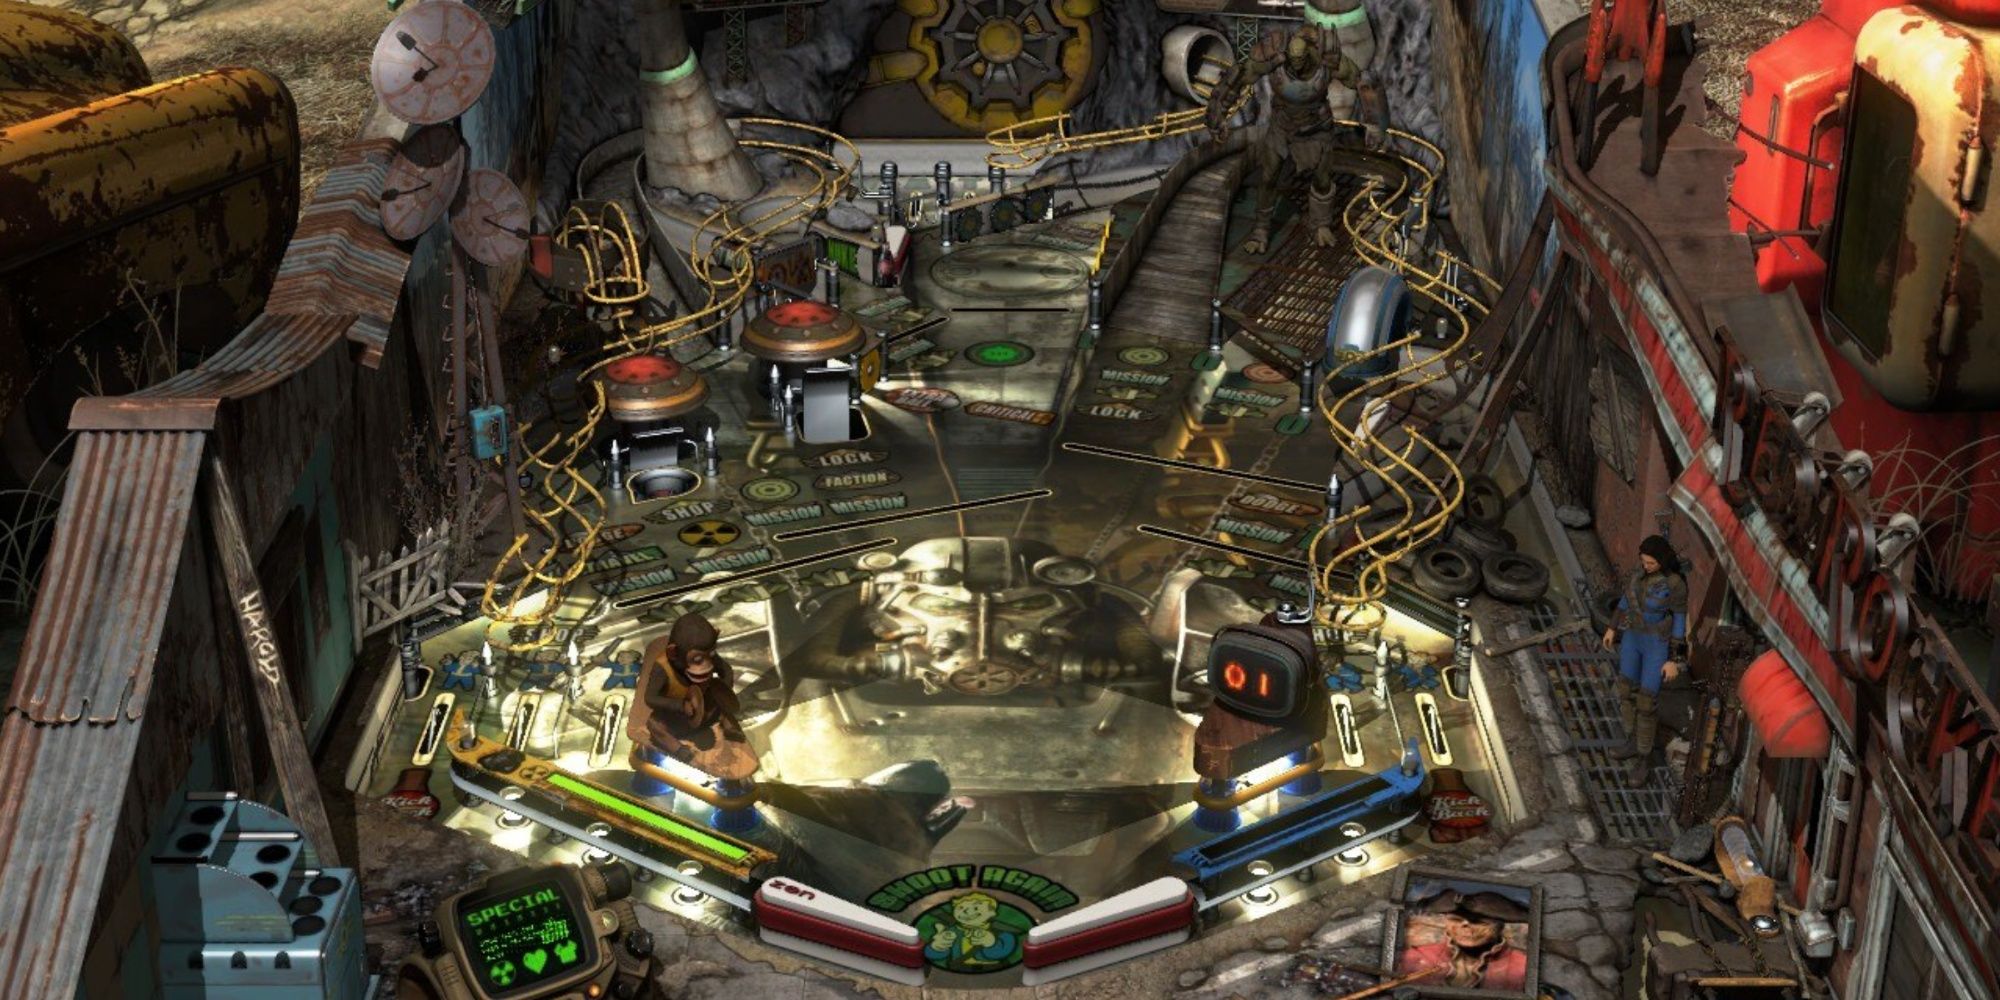 Full board layout of the Fallout pinball video game